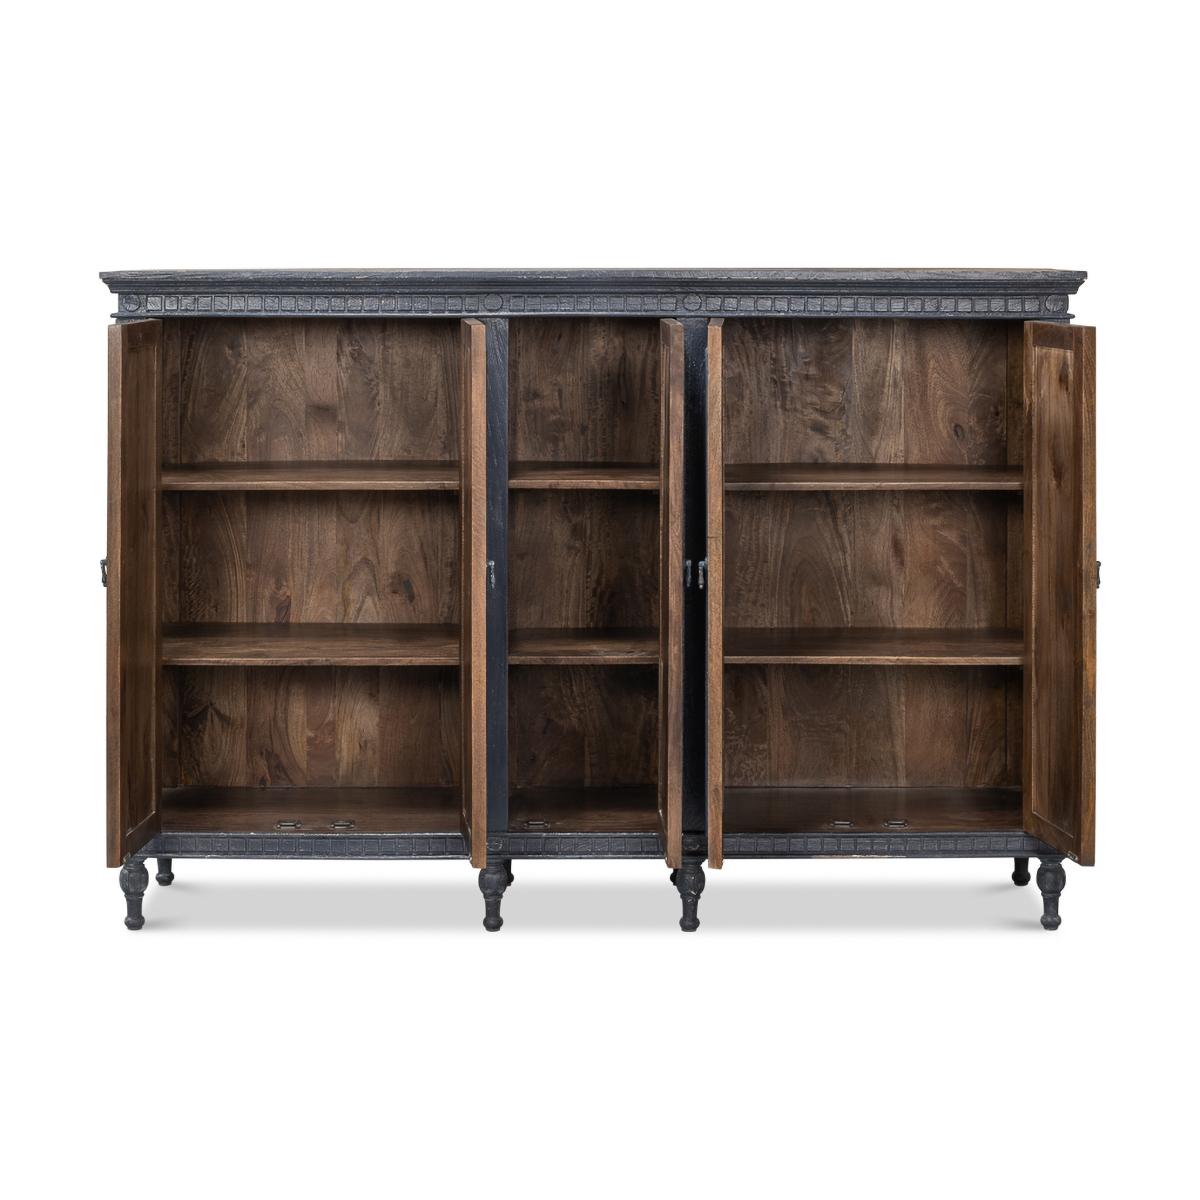 Asian French Provincial Directoire Style Chateau Credenza For Sale